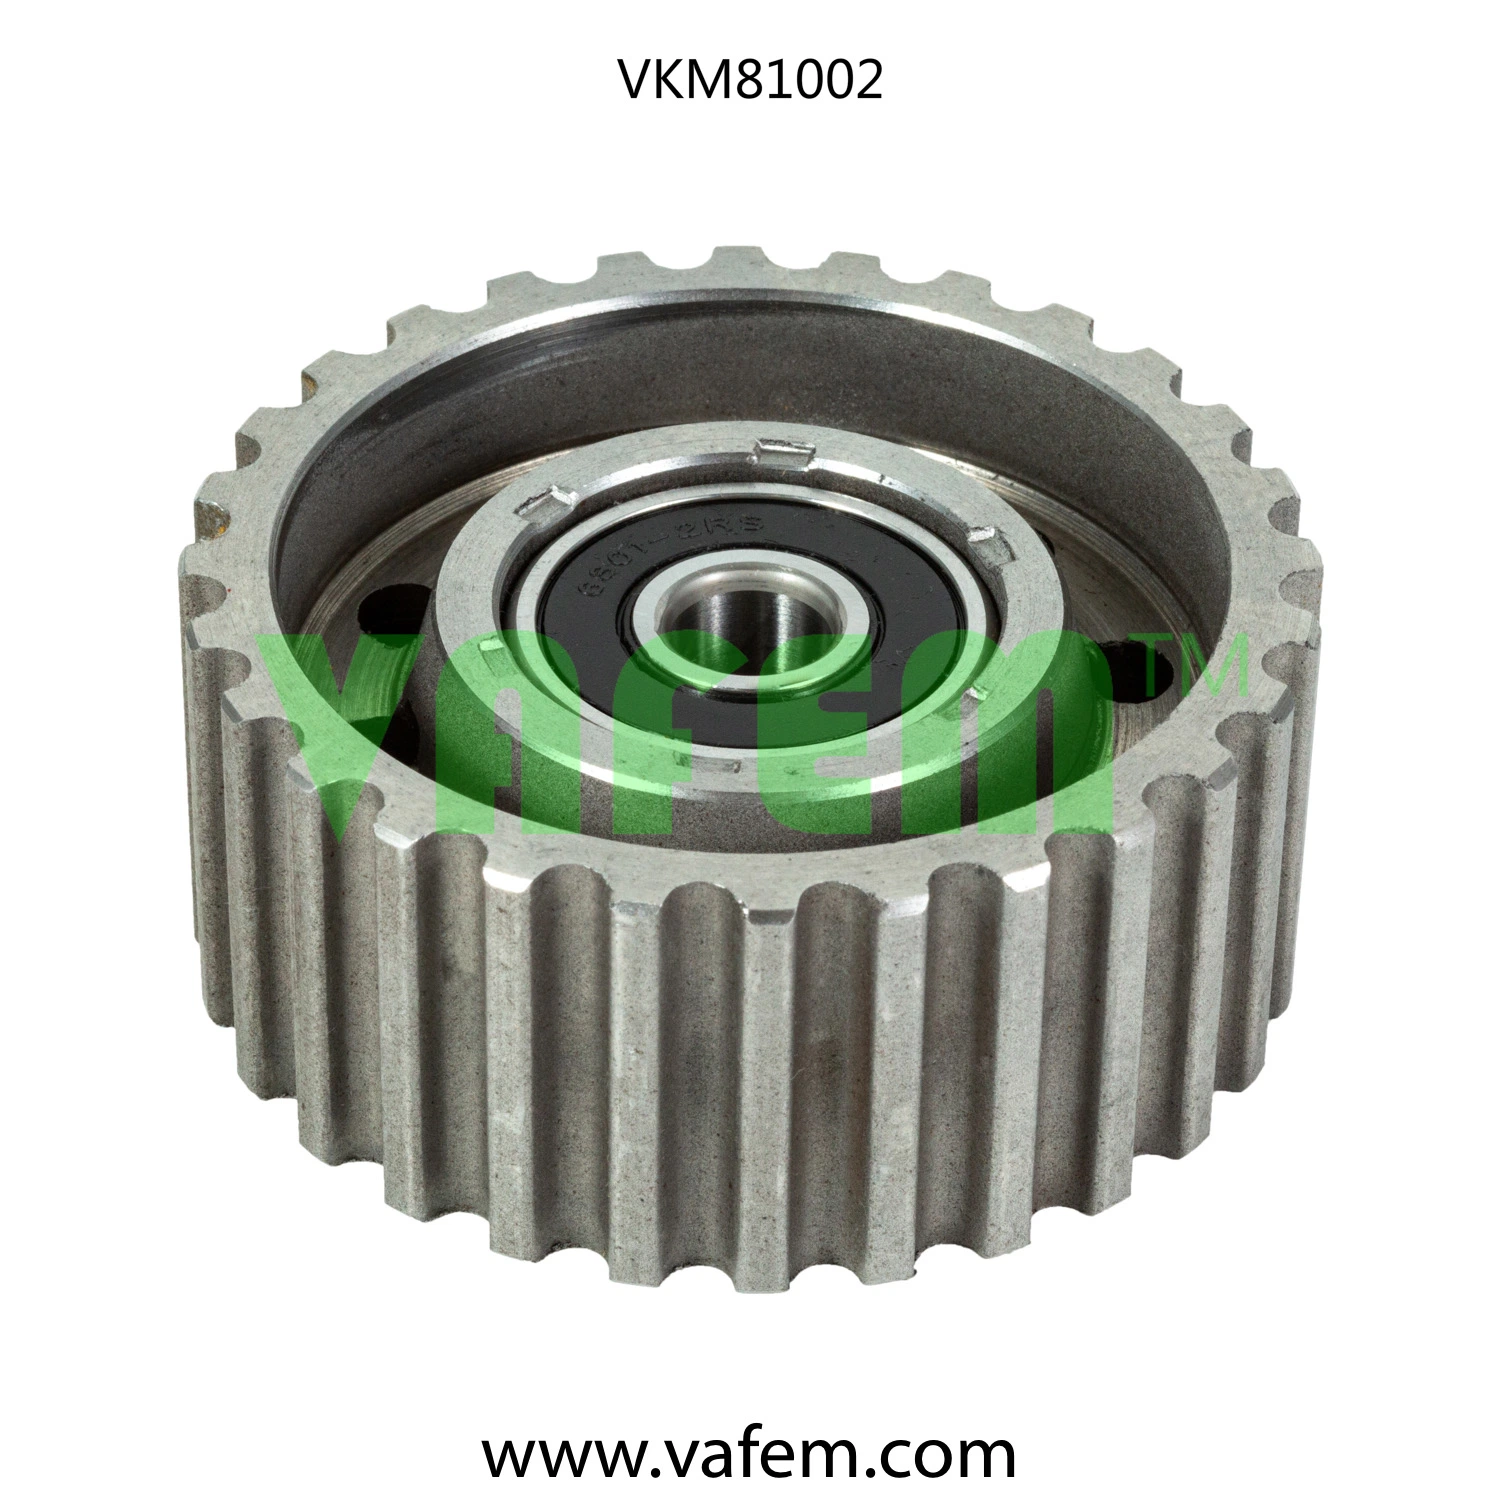 Auto Parts, Tensioner Pulley, Auto Tension Bearings, Tensioner Bearing, Vkm81002